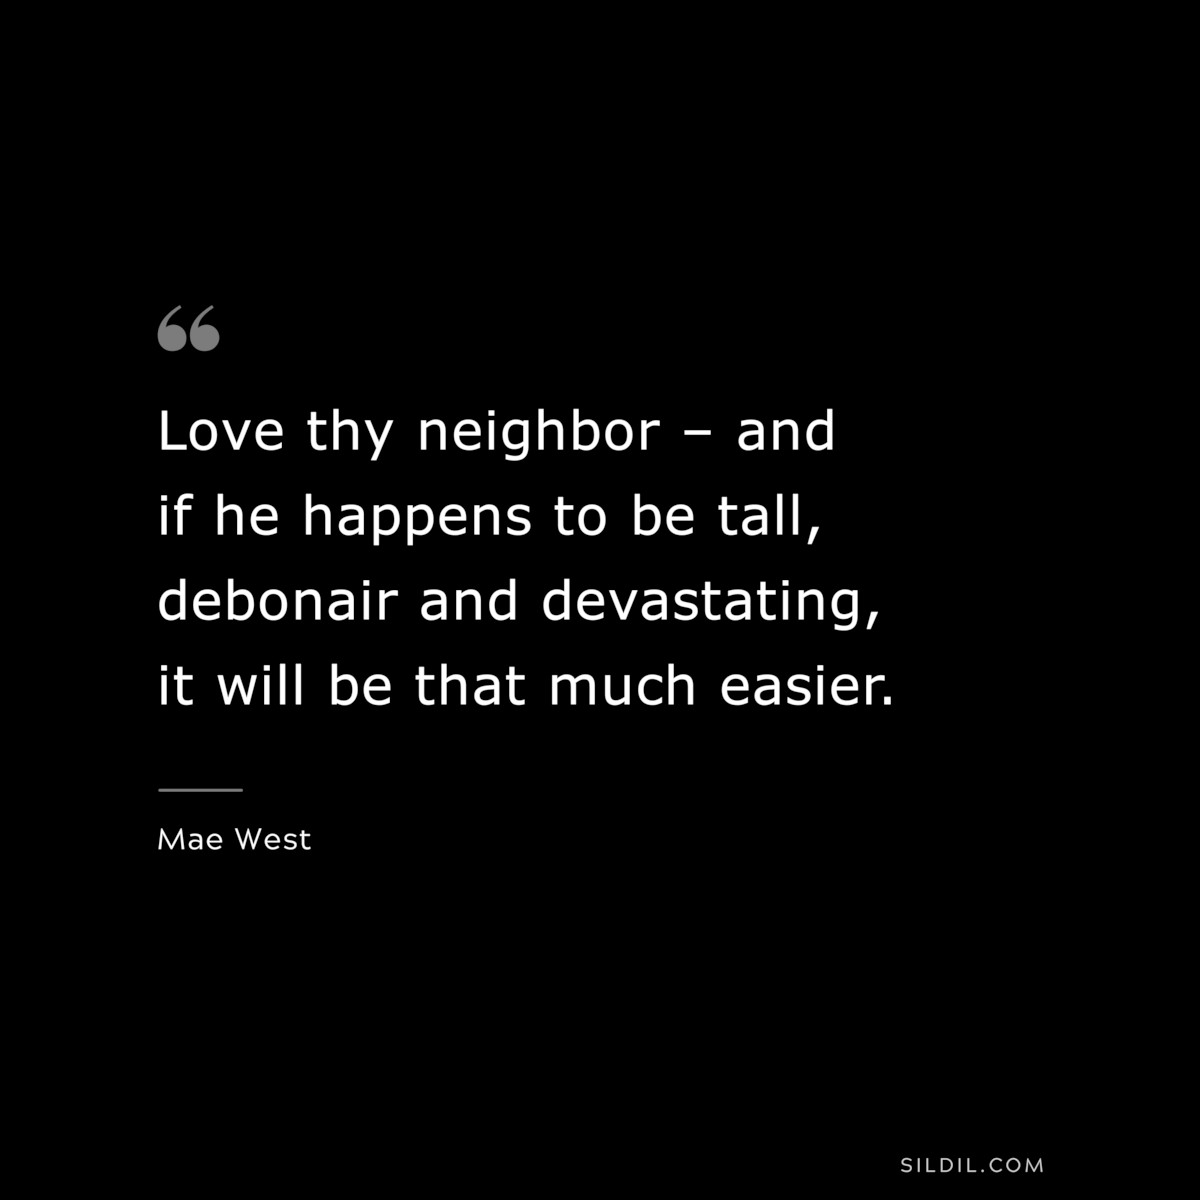 Love thy neighbor – and if he happens to be tall, debonair and devastating, it will be that much easier. ― Mae West